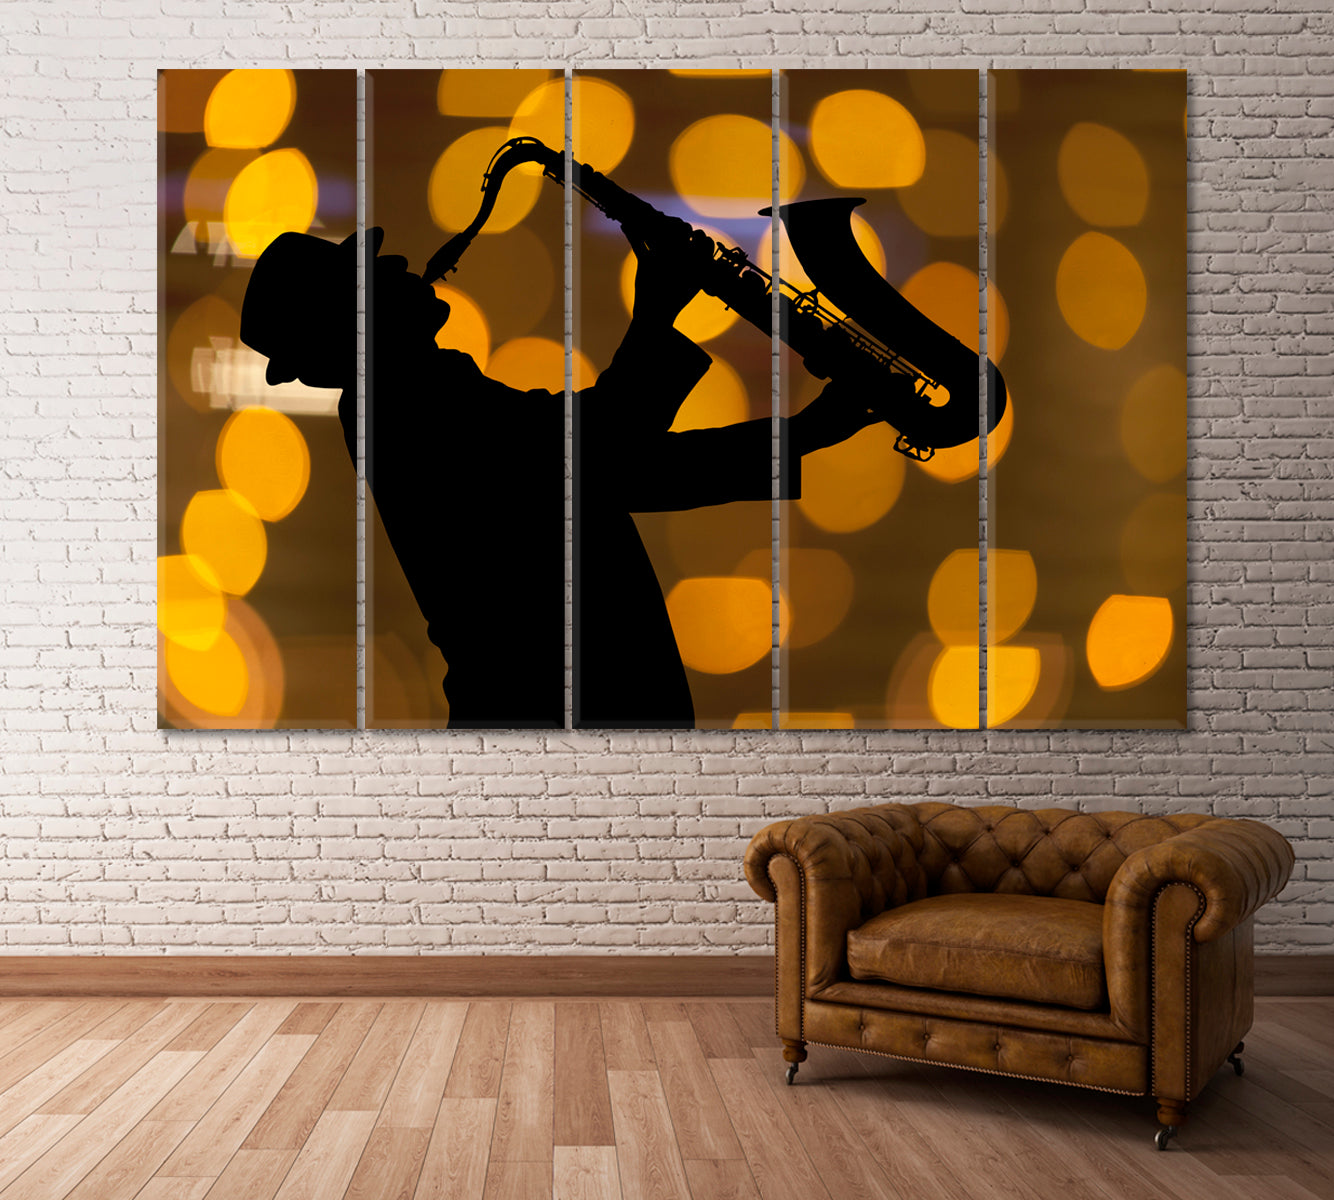 Saxophonist Against Beautiful Lights Canvas Print ArtLexy 5 Panels 36"x24" inches 